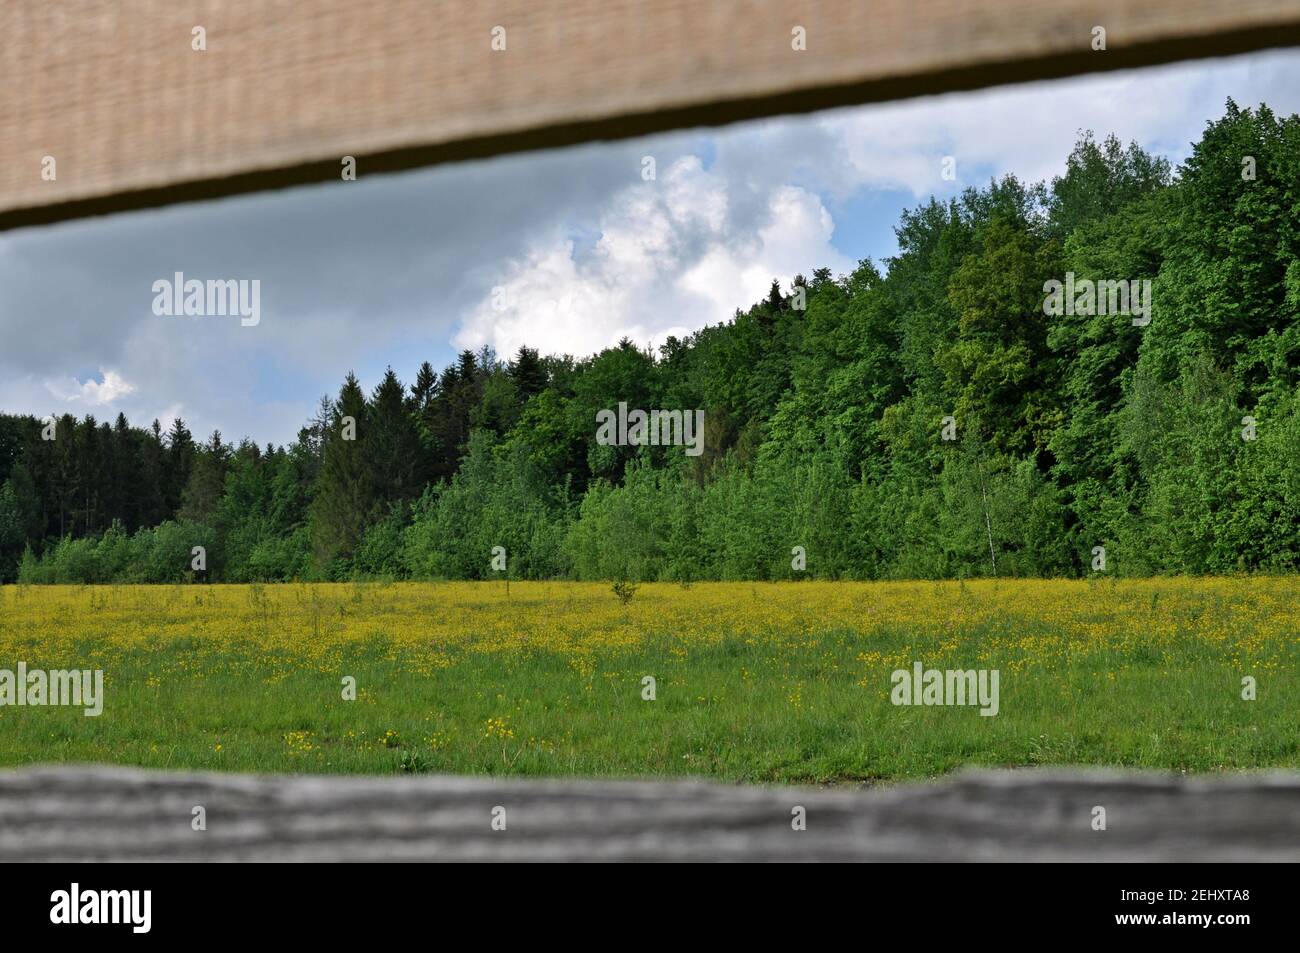 Landscape of a green and yellow meadow in an wooden fence frame , with trees in background and cloudy sky. Stock Photo